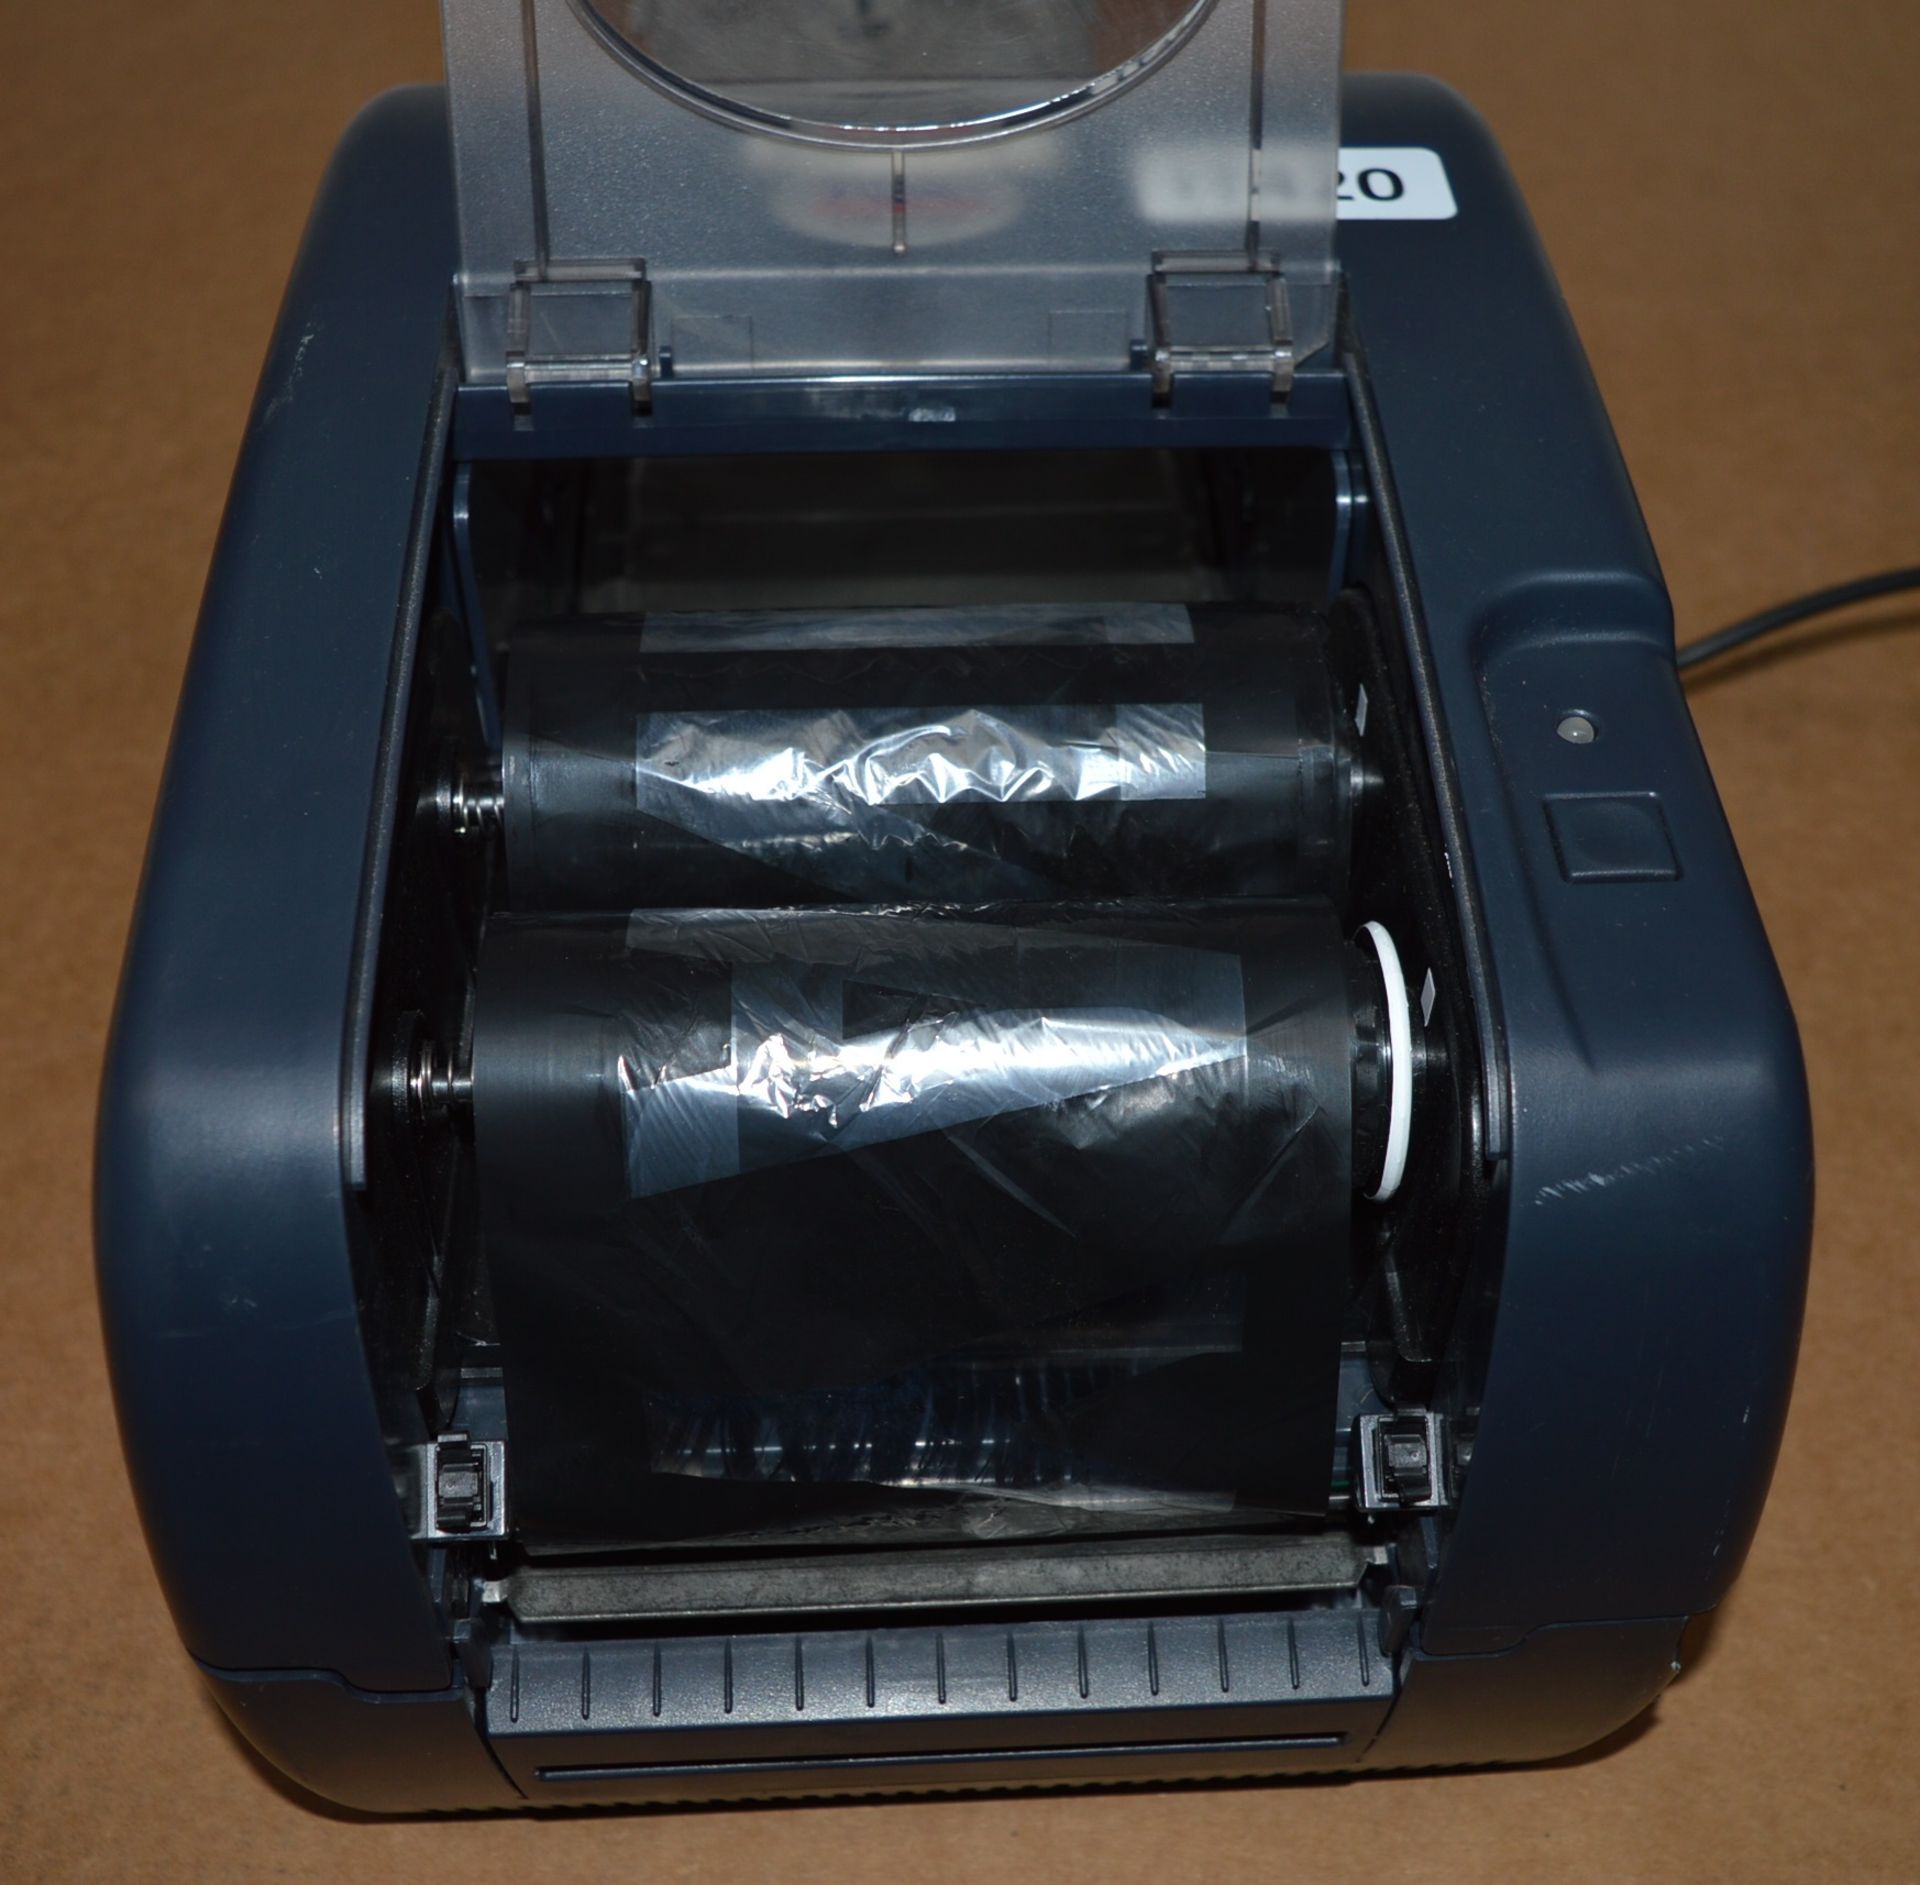 1 x TSC TTP-247 Thermal Label Printer - Includes Power Adaptor - CL011 - Ref IT420 - Location: - Image 4 of 7